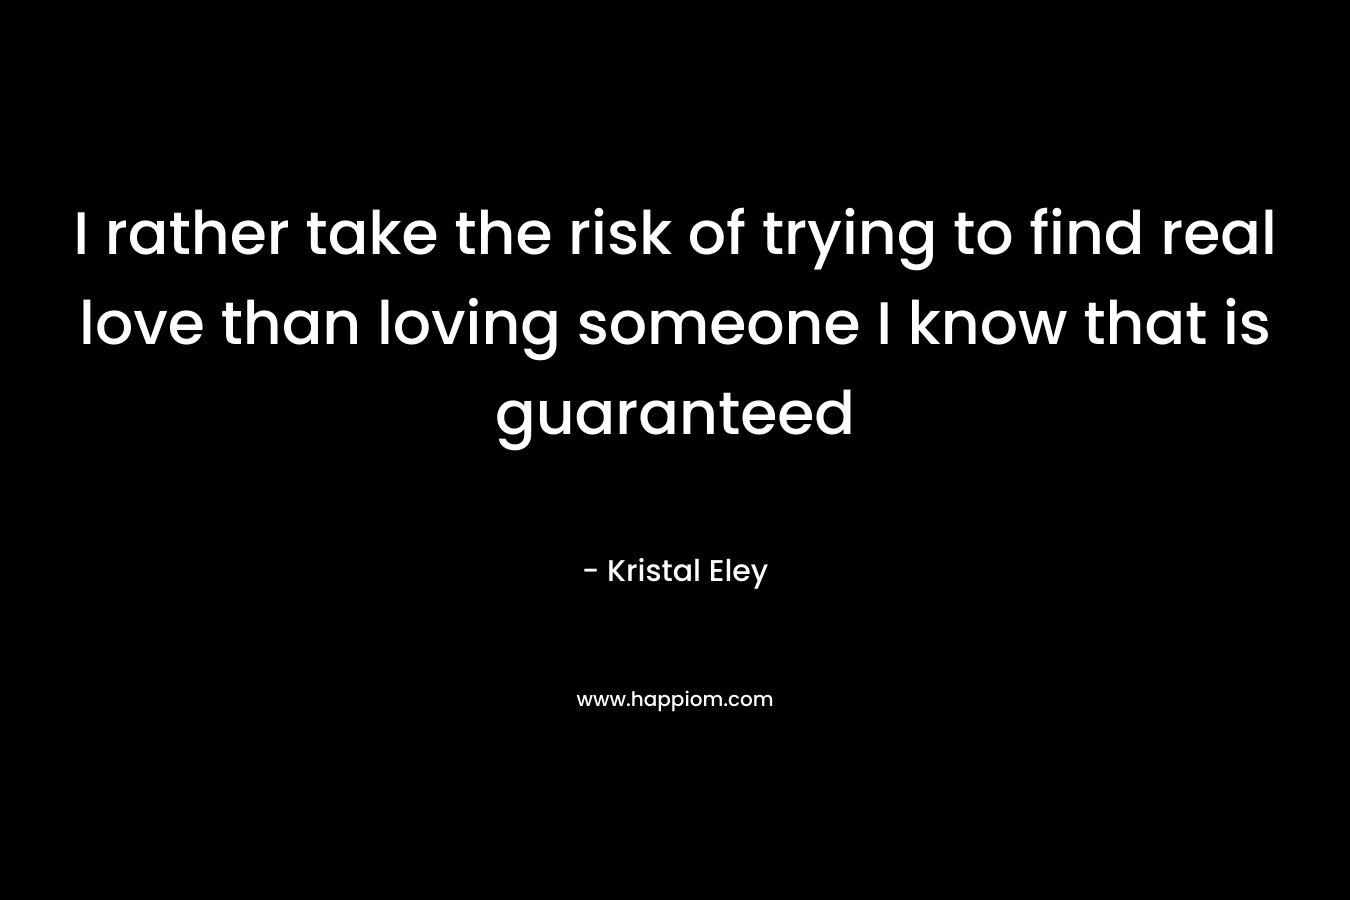 I rather take the risk of trying to find real love than loving someone I know that is guaranteed – Kristal Eley